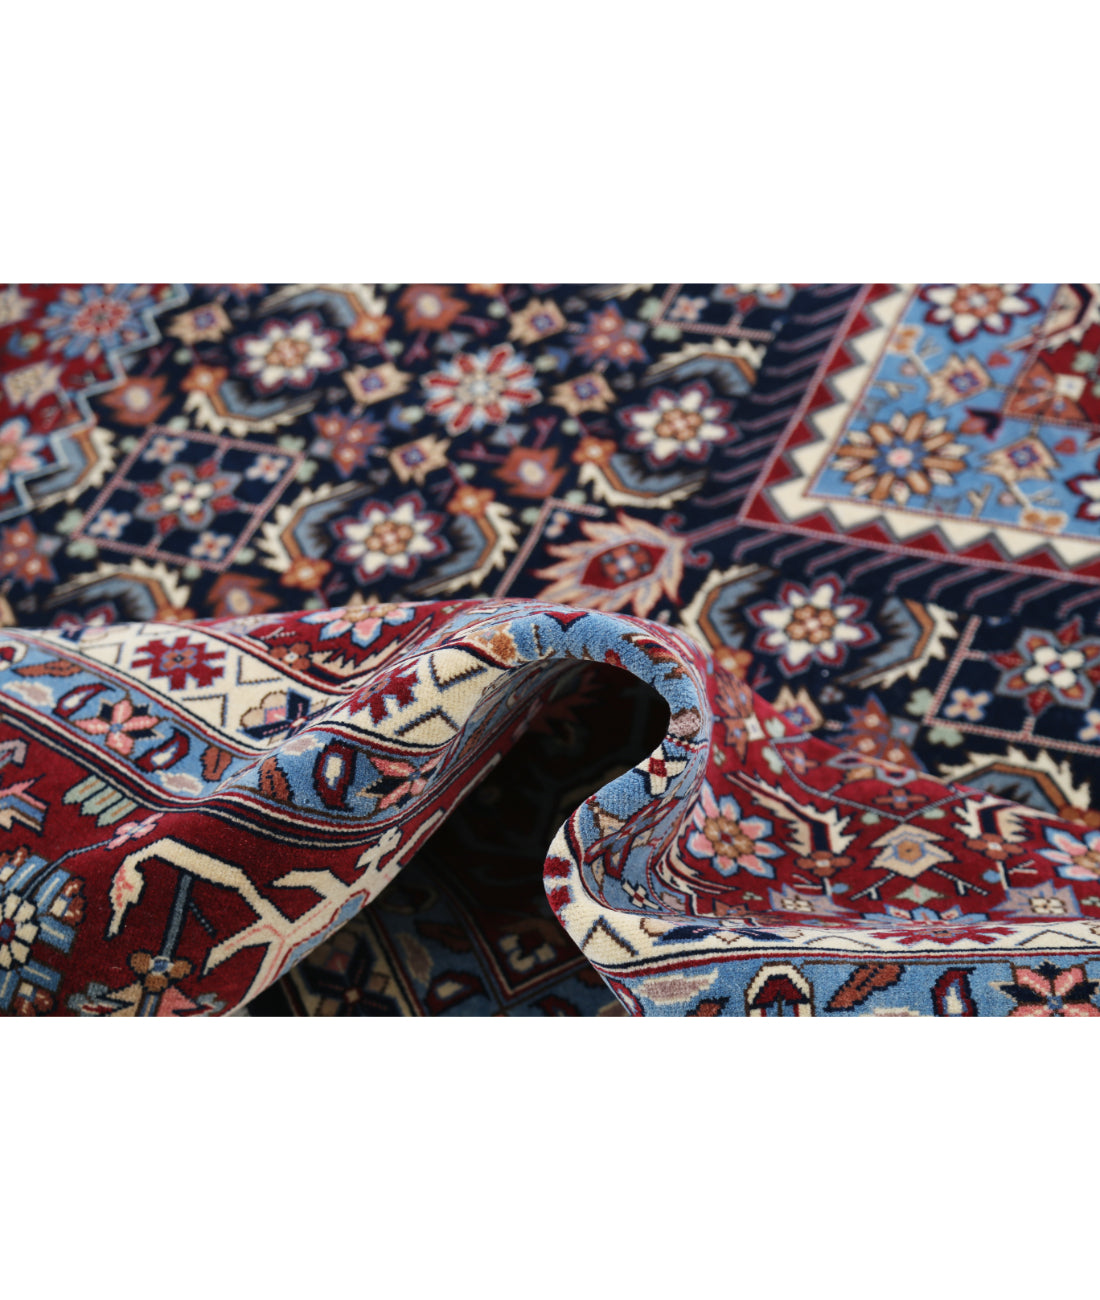 Heritage 8' 0" X 10' 0" Hand-Knotted Wool Rug 8' 0" X 10' 0" (244 X 305) / Blue / Red